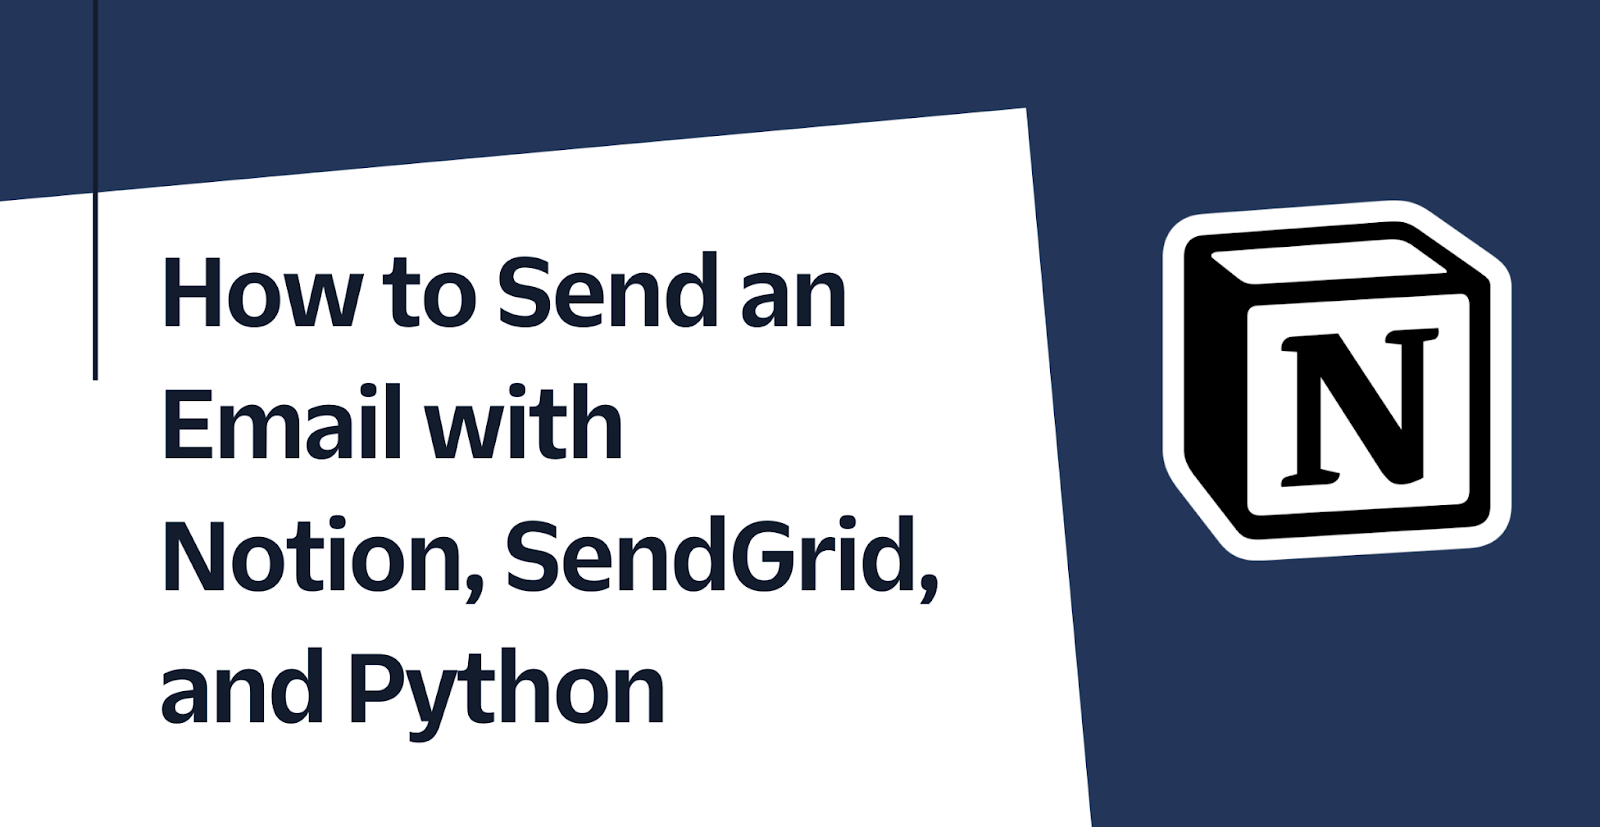 How to Send an Email with Notion, SendGrid, and Python